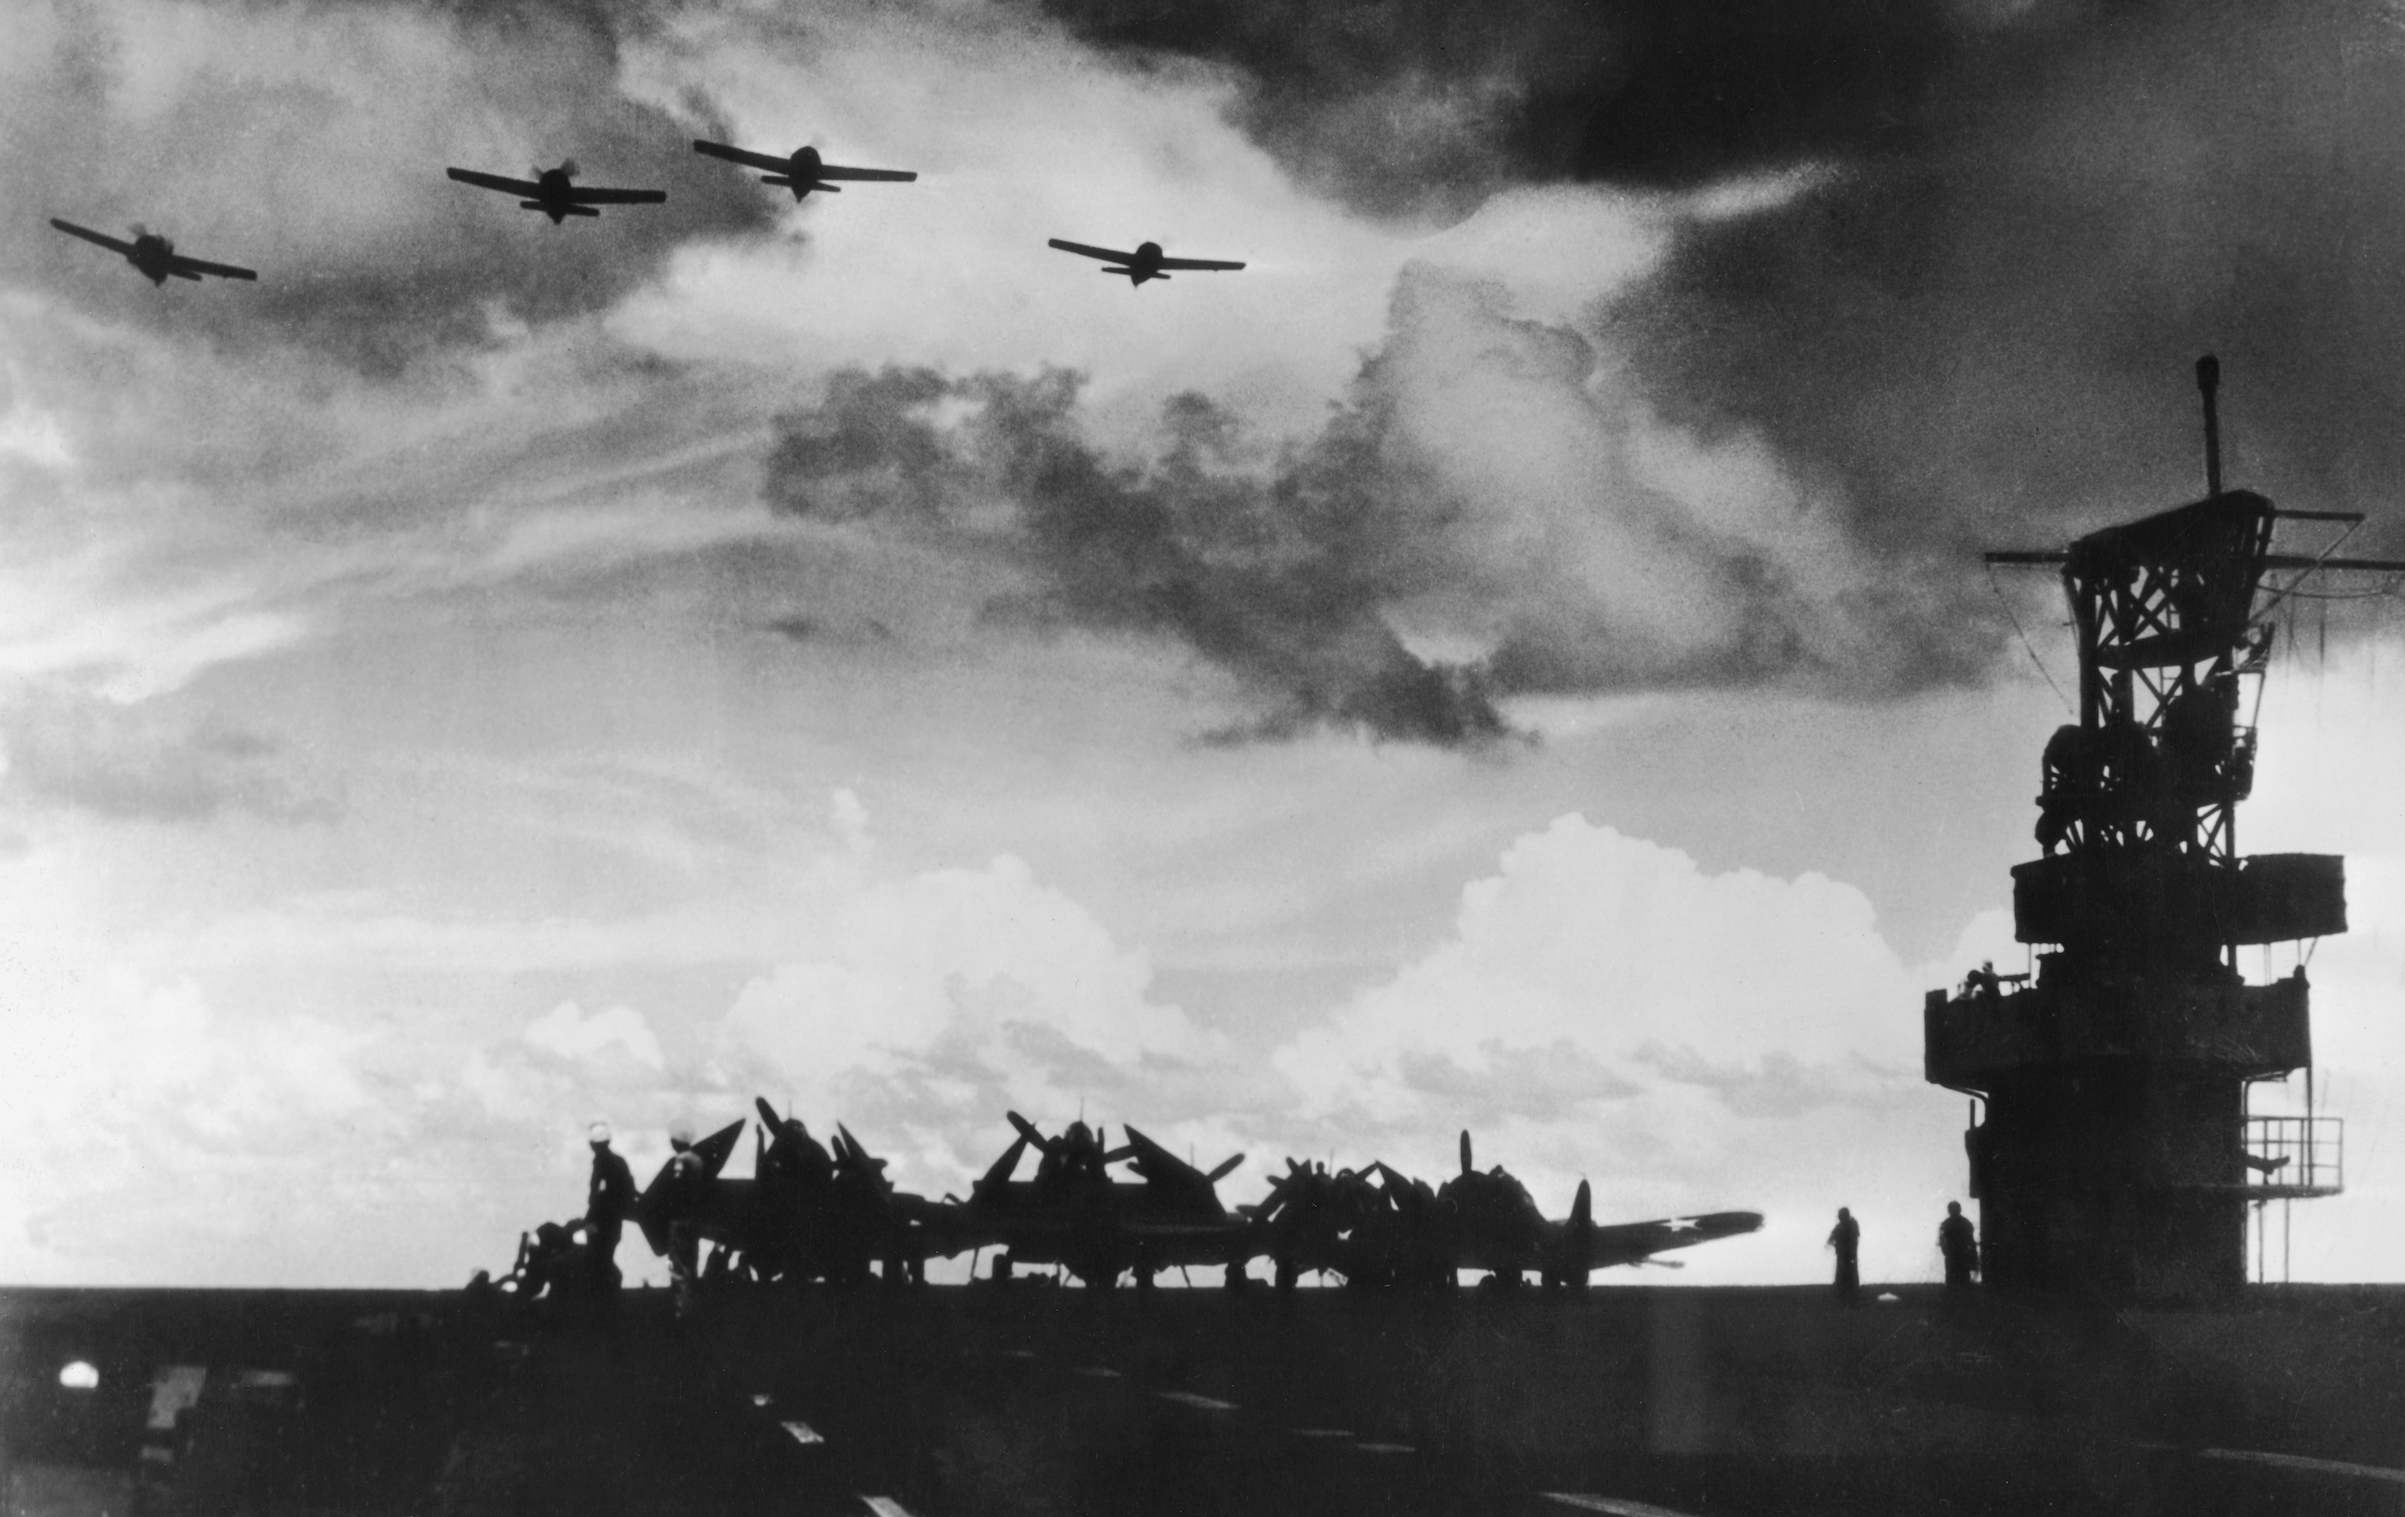 U.S. Navy bombers in flight over their carrier, circa 1944, the year the first African-American sailors were selected for the Navy's Officer Candidate School. (Getty Images)